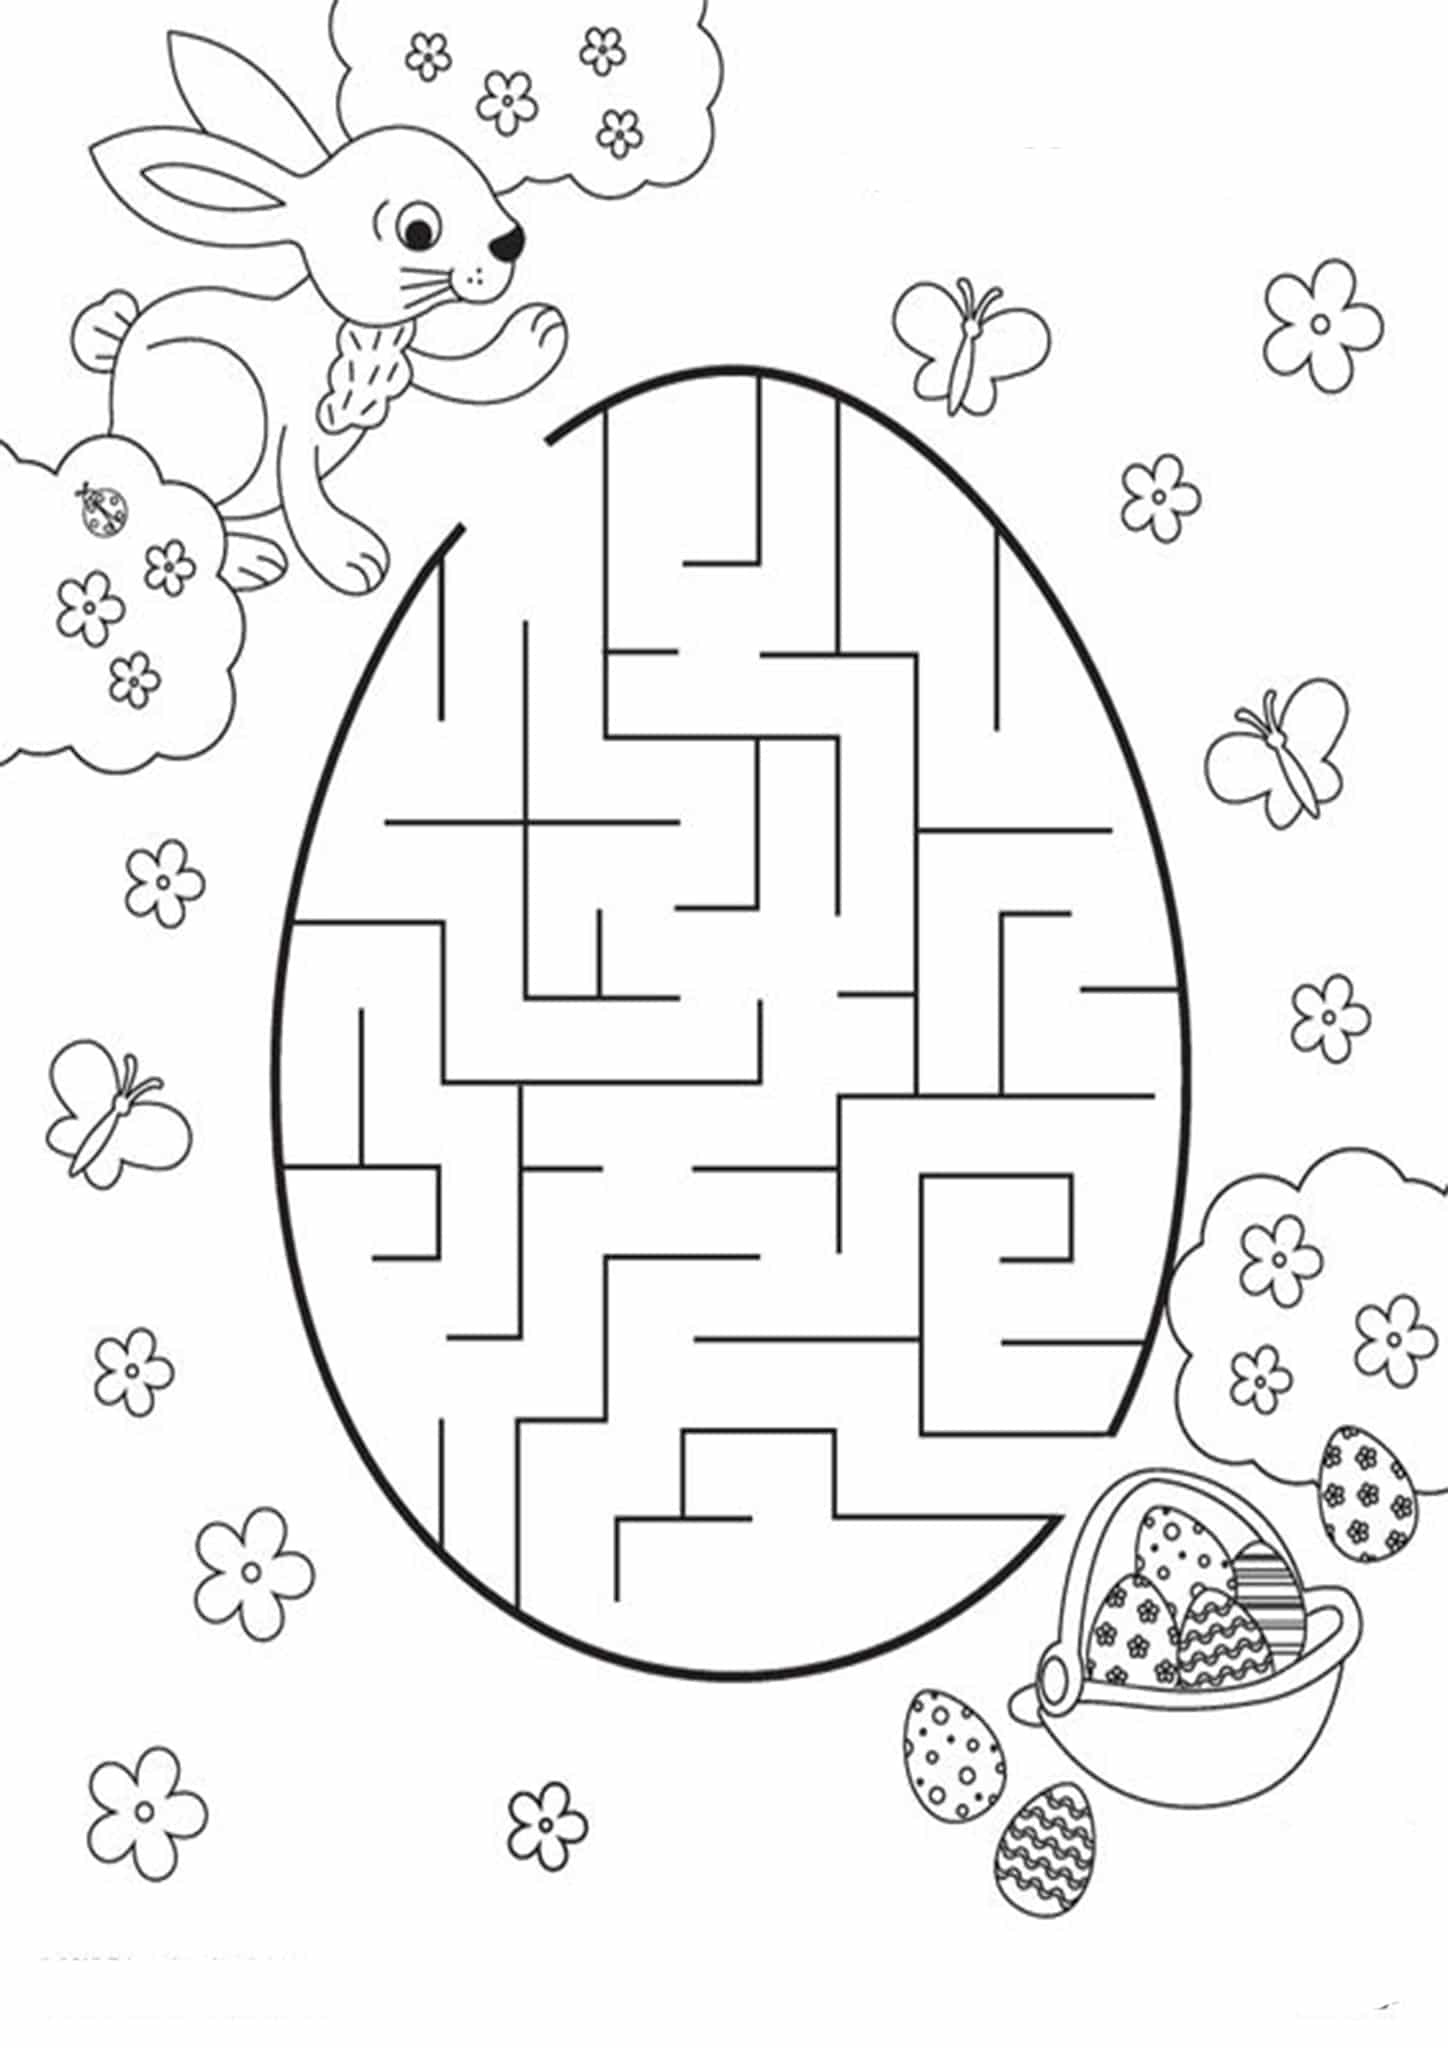 preschool-bible-puzzles-lessons-for-sunday-school-free-simple-maze-printables-for-preschoolers